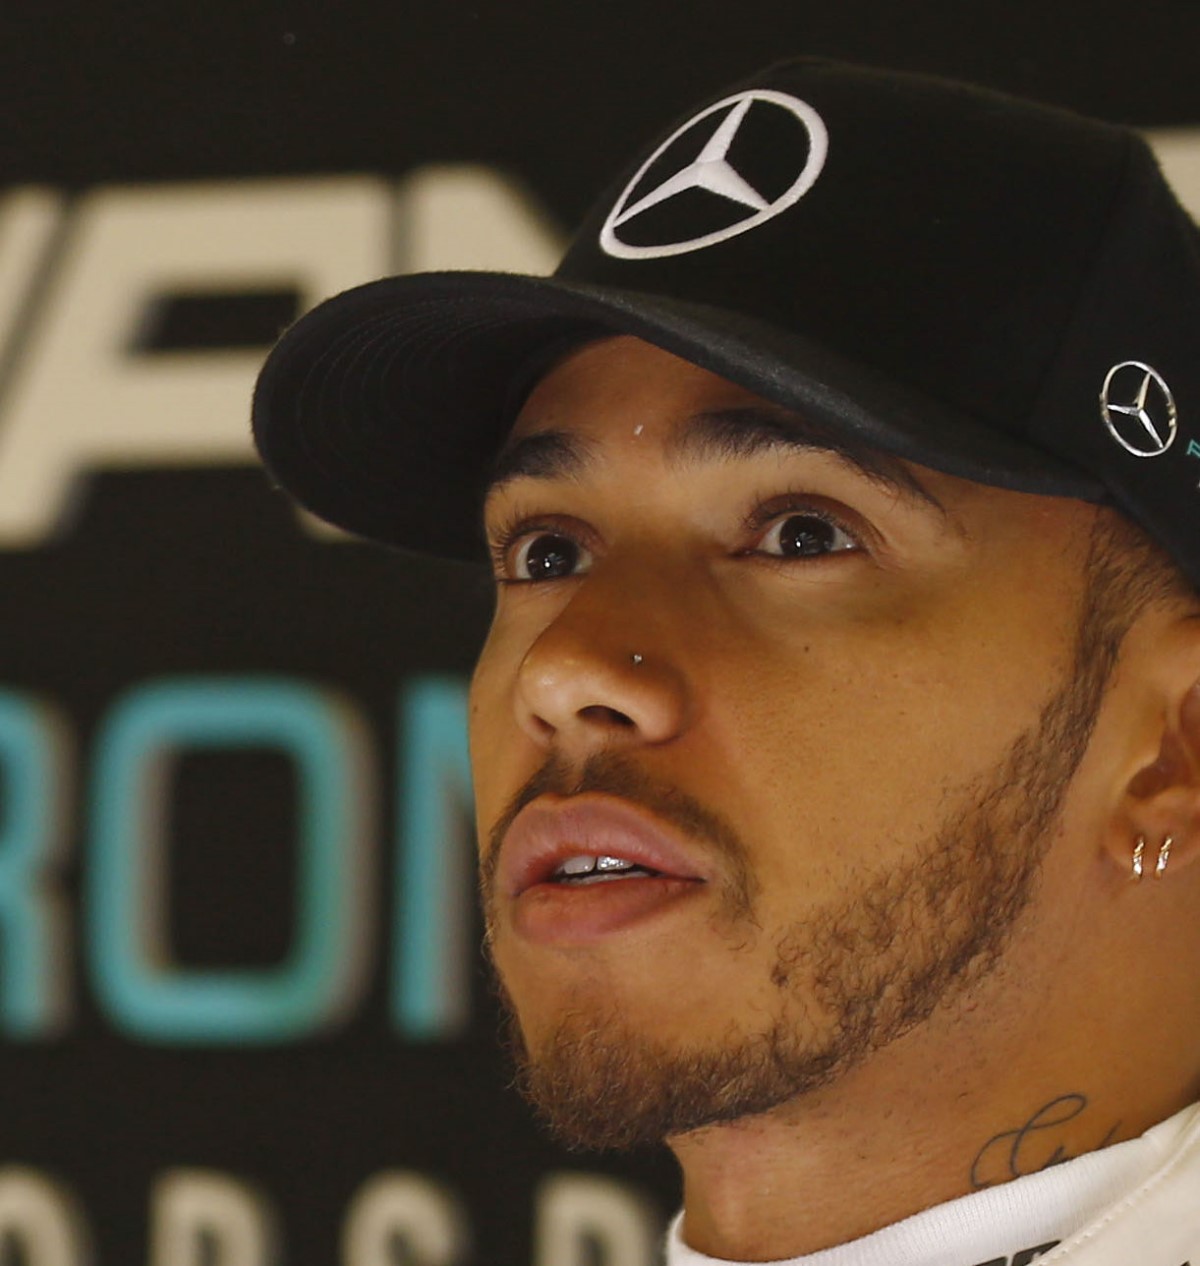 Hamilton won't quit F1. When you drive an Aldo Costa car you win a lot and F1 is fun